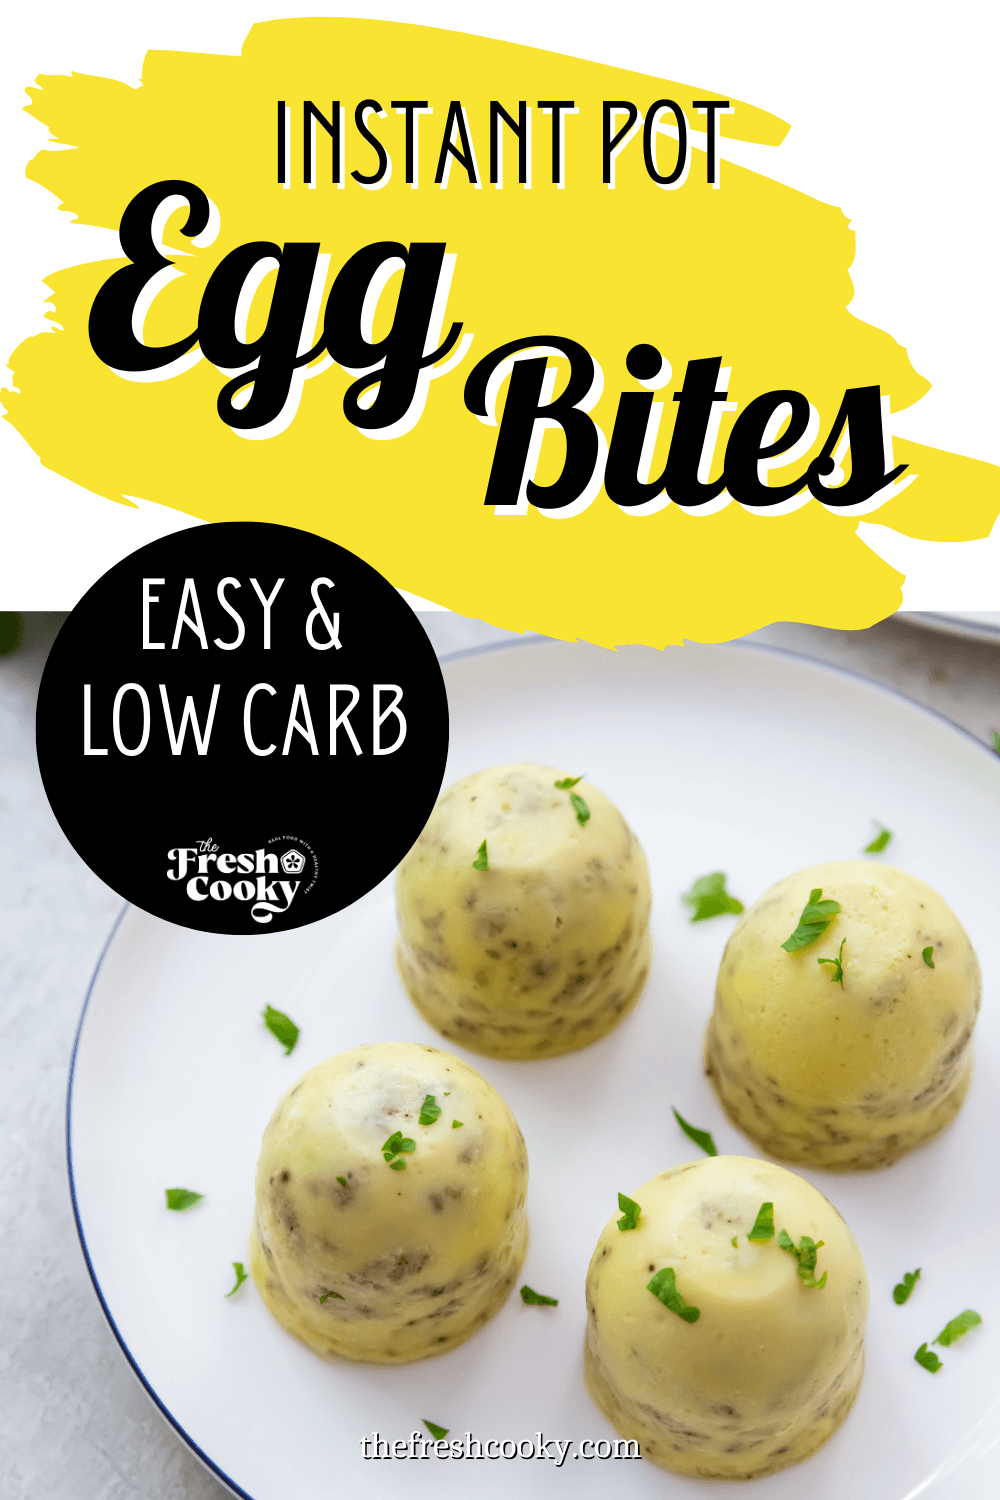 Recipes To You Make With Egg Bite Molds  Healthy instant pot recipes,  Instant pot dinner recipes, Baby food recipes